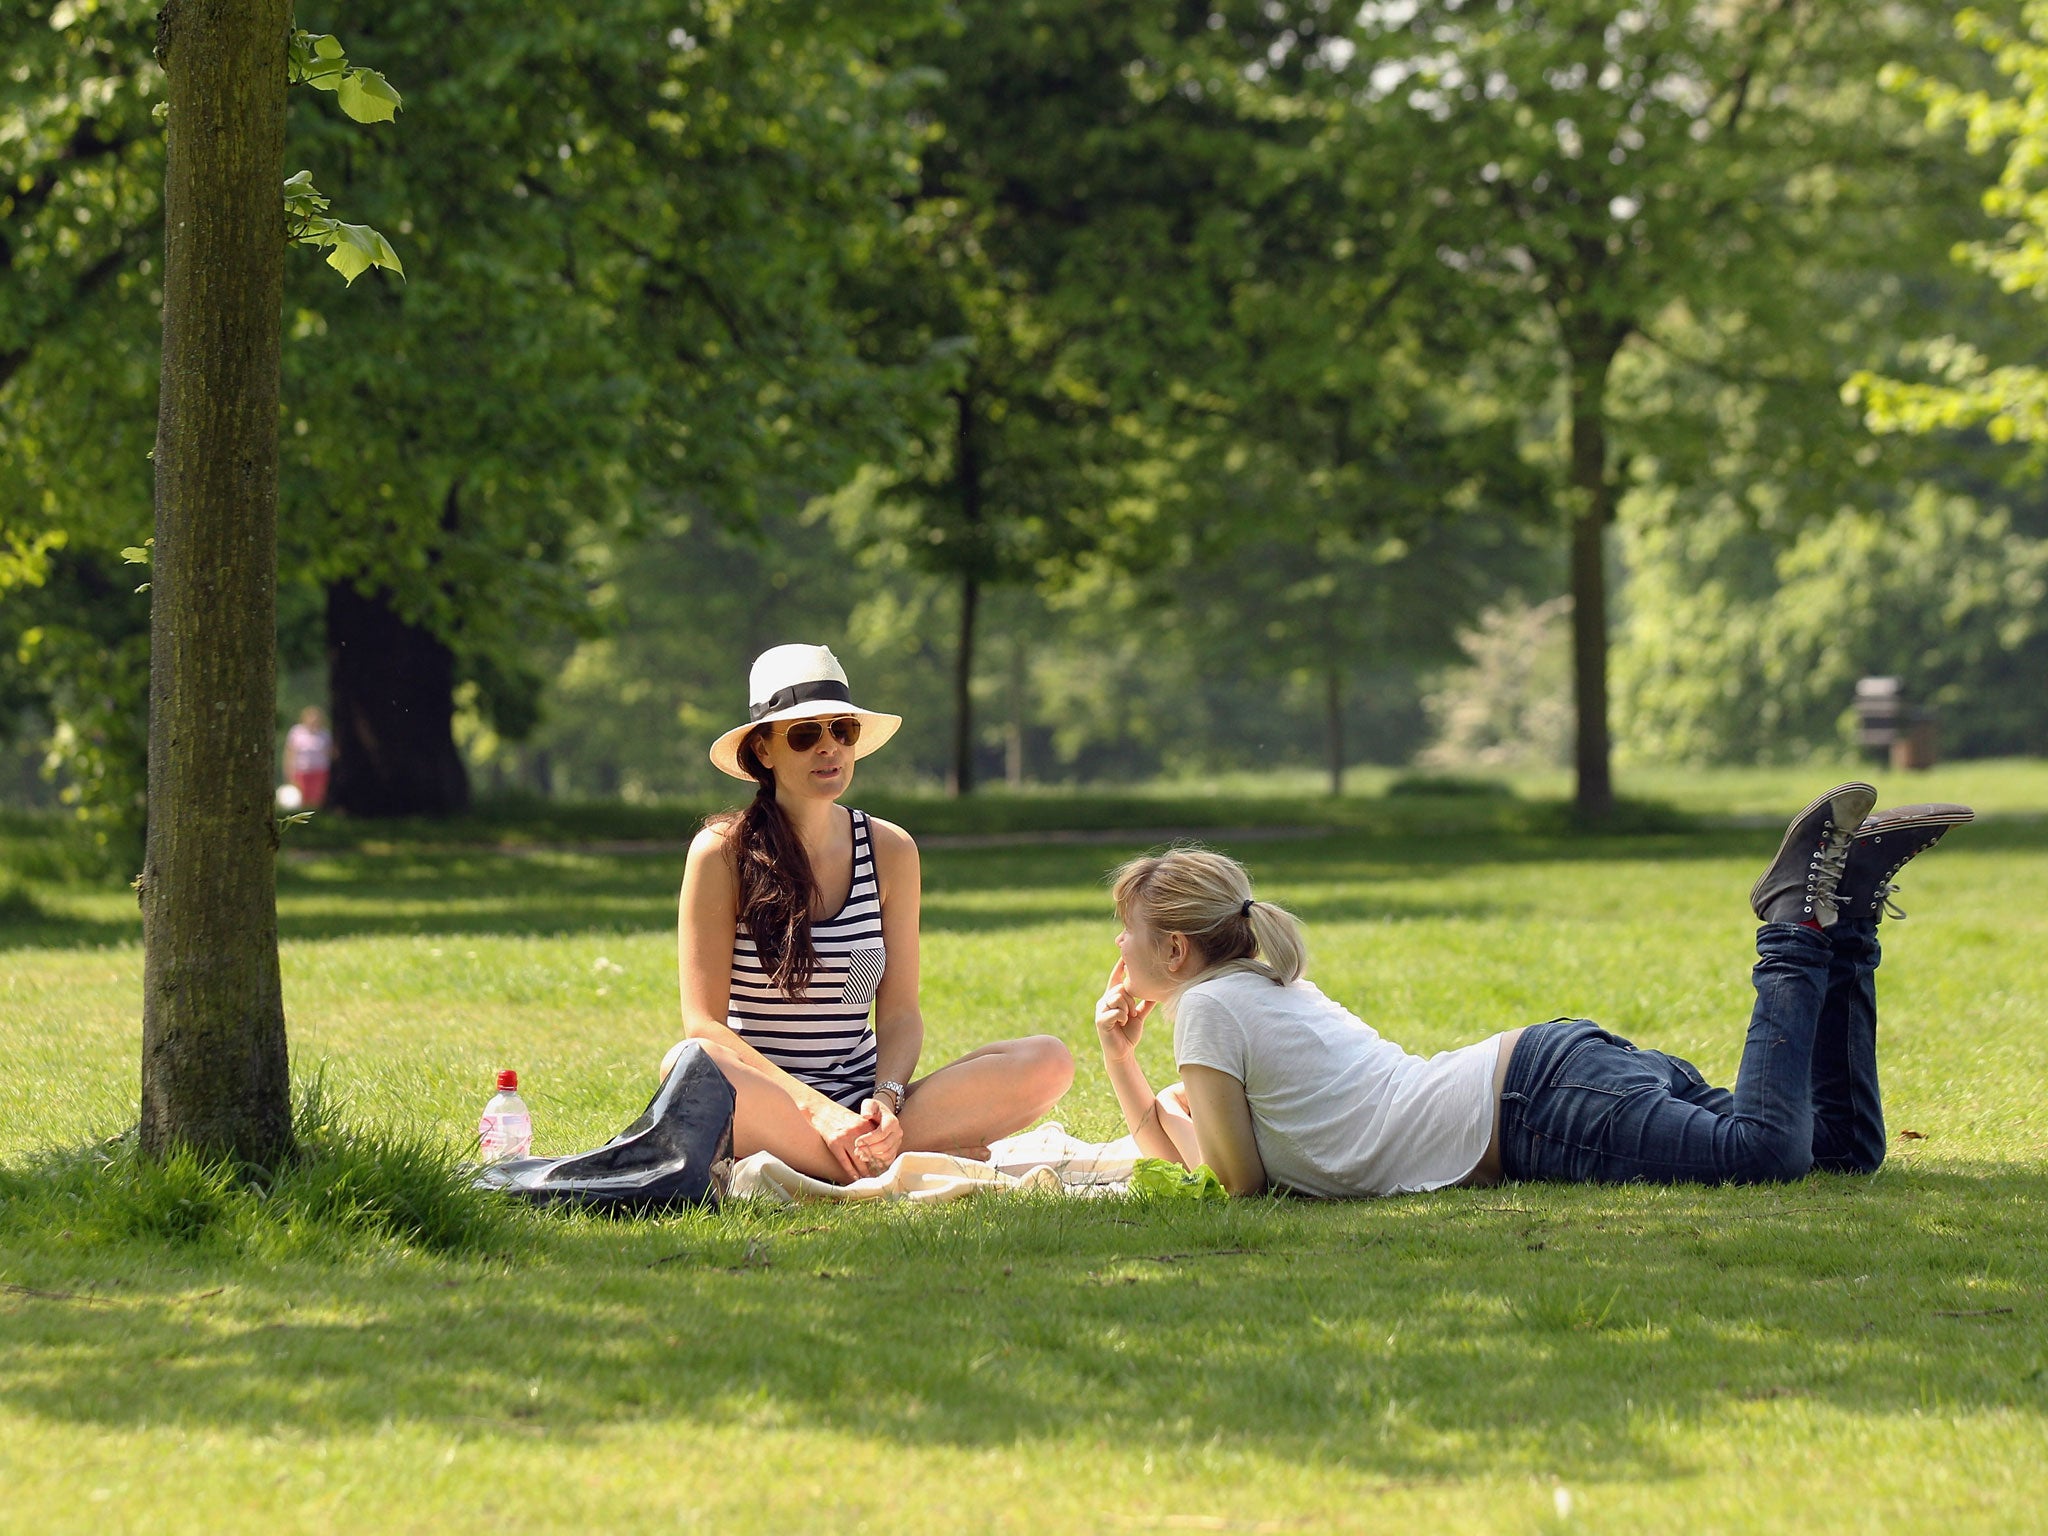 Two women relax in the sunshine in Hyde Park on May 23, 2012 in London, England.